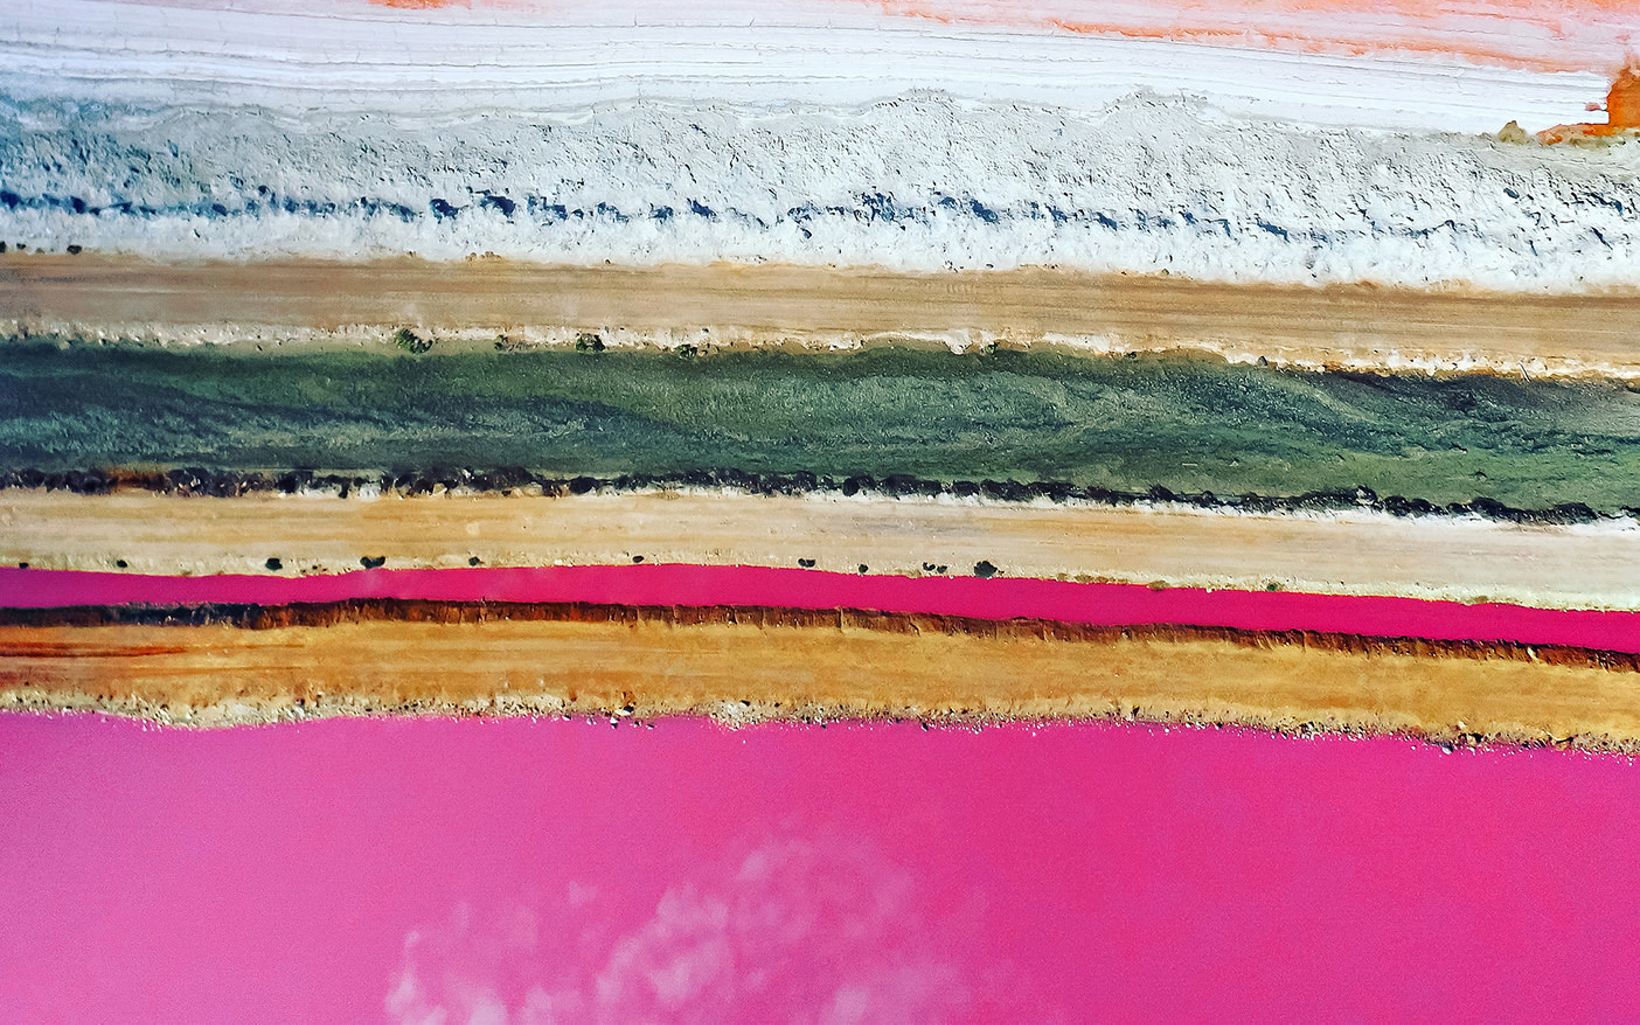 Drone photo showing the pink hues of a pink lake called Hutt Lagoon, Western Australia.